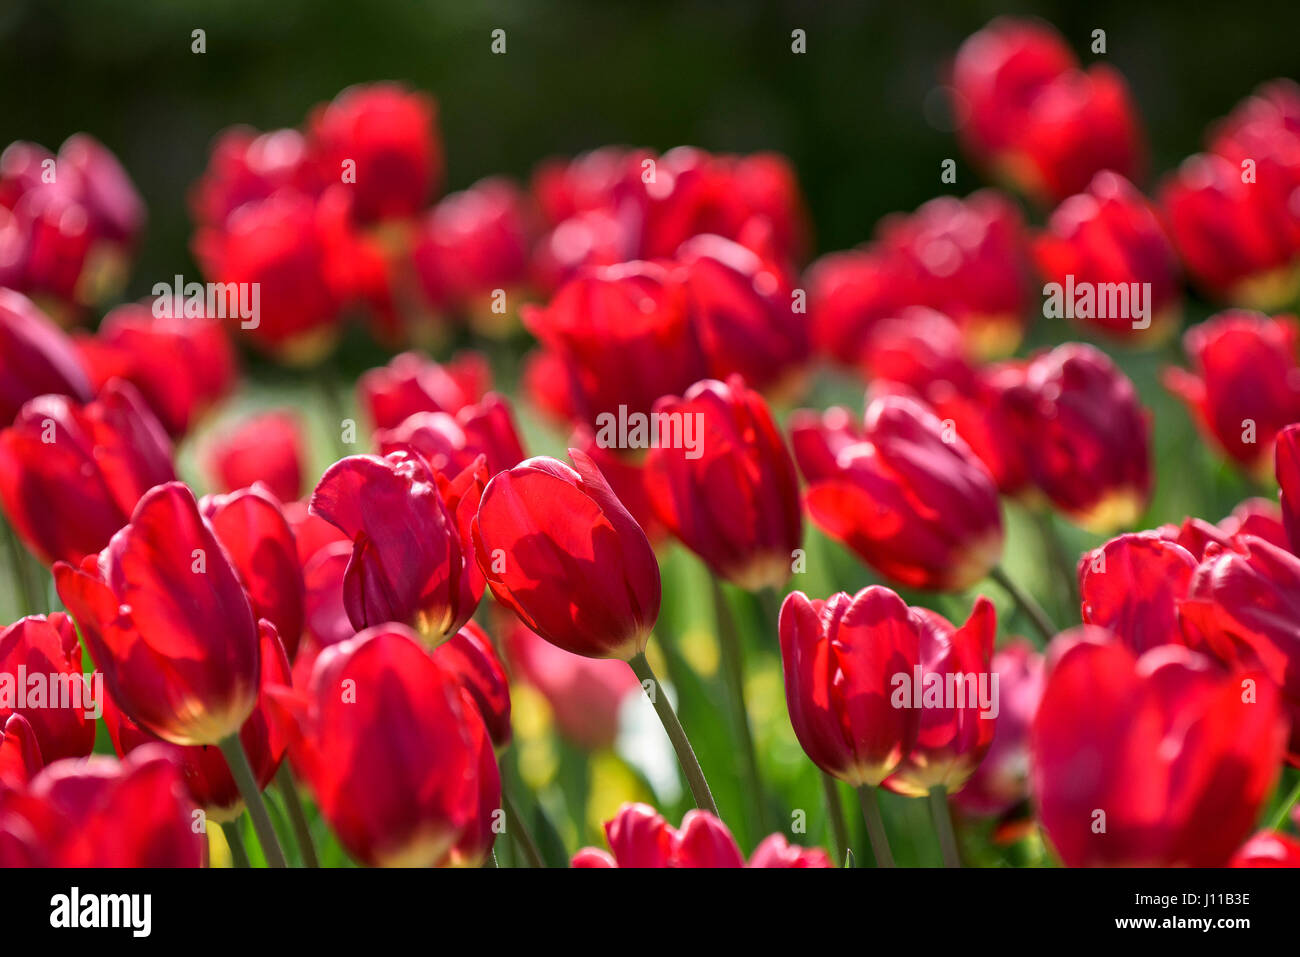 Flowers Tulips Tulipa Perennial Bedding plant Plant Bloom Petals Vibrant Red Colourful Colorful Garden Gardening Horticulture Stock Photo